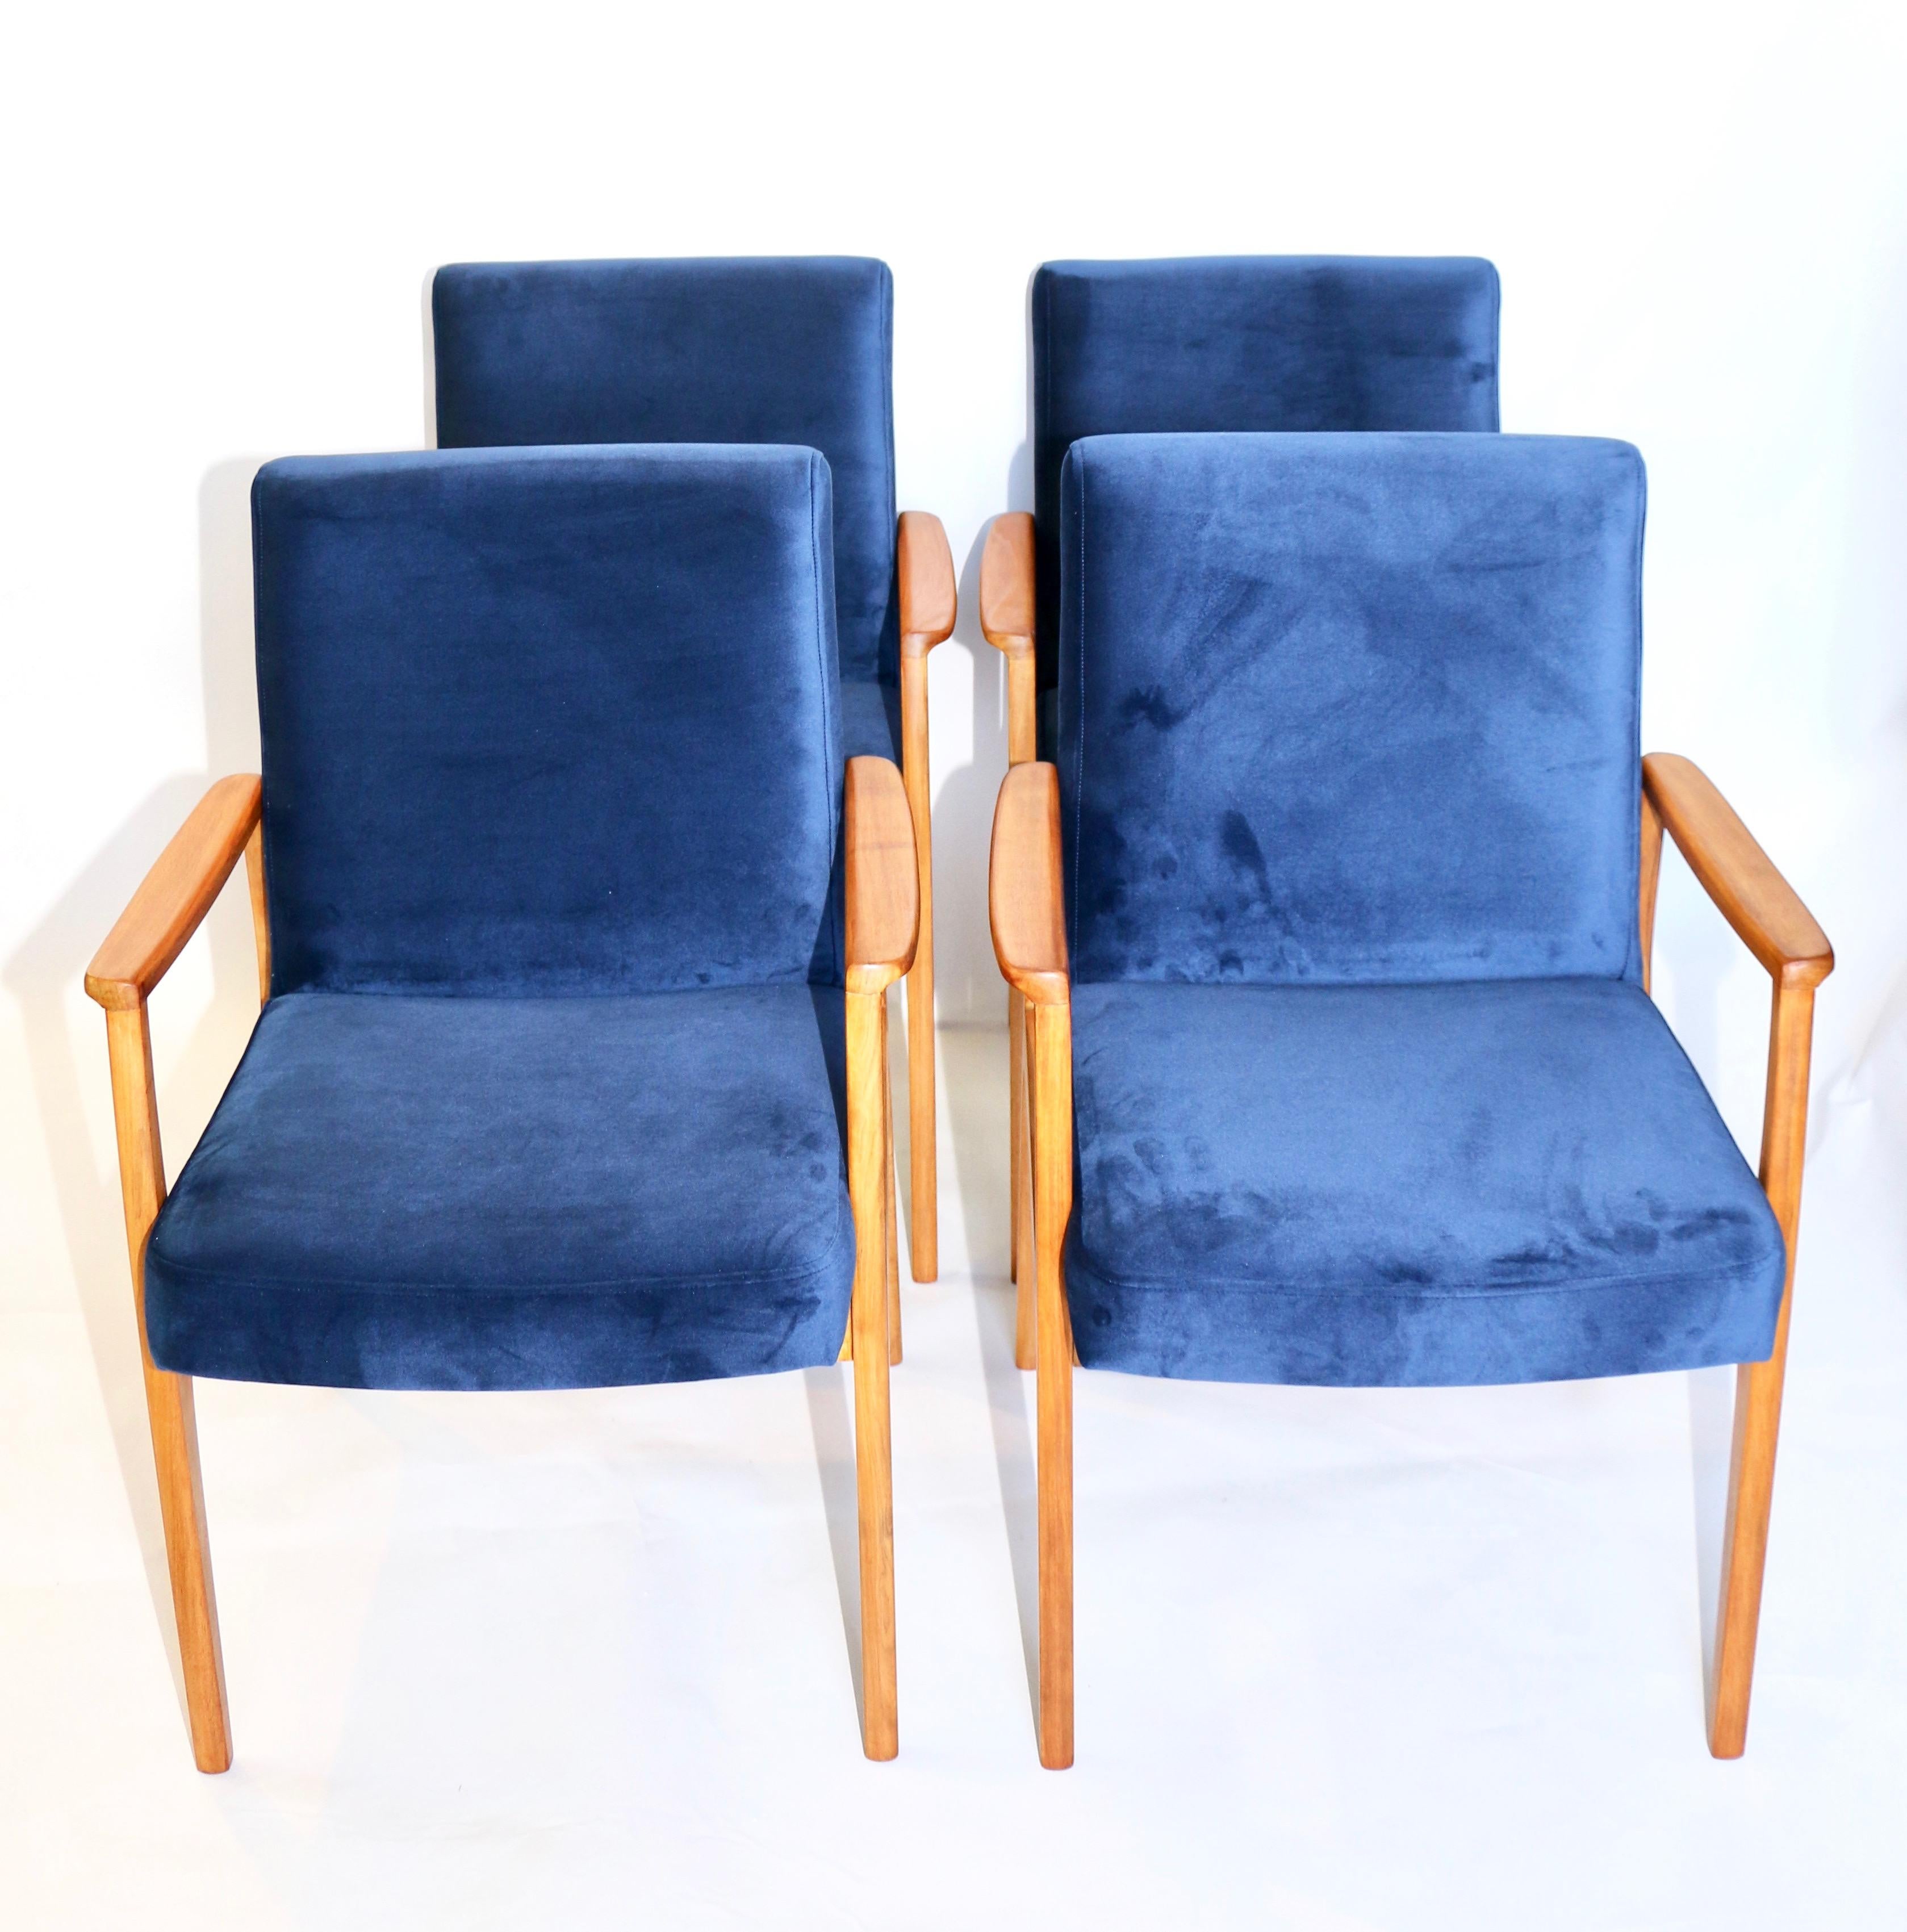 Set of 4 chairs in blue velvet from 1980s, new upholstery covered with velvet fabric in fashionable blue color, finished with wooden chair cushion. Wooden elements in natural American oak color. Perfect condition.

Dimension: H 88 x W 60 x D 55.